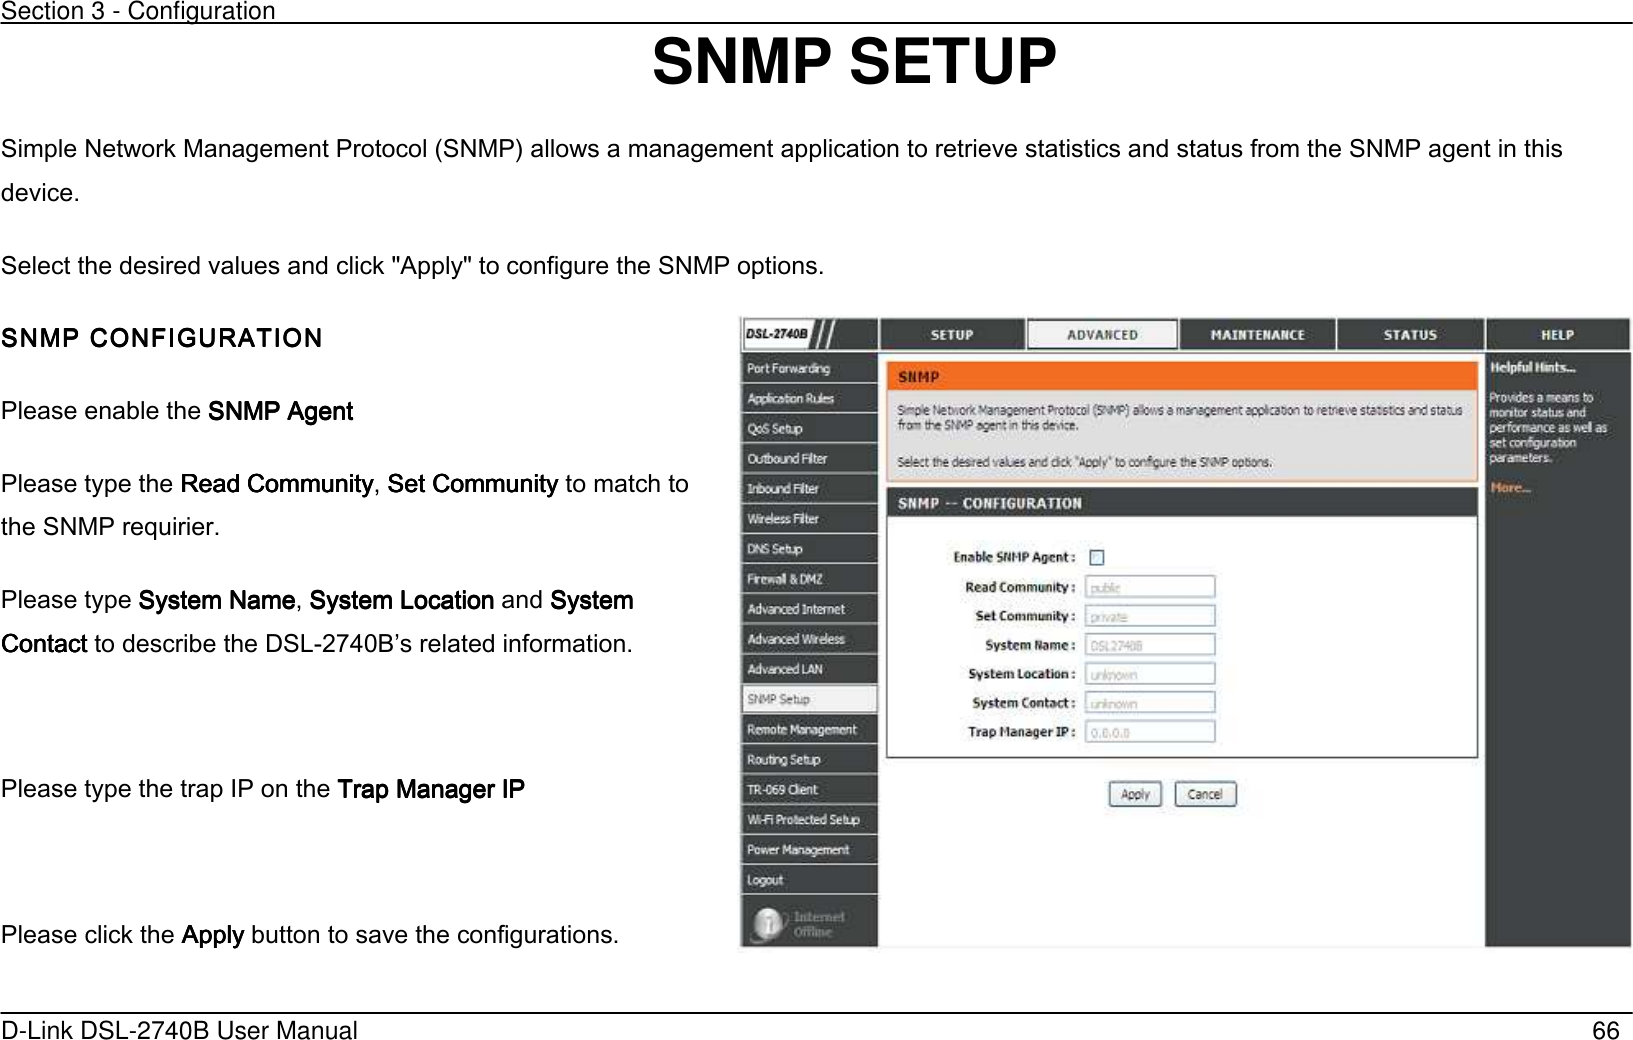 Section 3 - Configuration   D-Link DSL-2740B User Manual                                                  66 SNMP SETUP   Simple Network Management Protocol (SNMP’ allows a management application to retrieve statistics and status from the SNMP agent in this device. Select the desired values and click &quot;Apply&quot; to configure the SNMP options. SNMP CONFIGURATIONSNMP CONFIGURATIONSNMP CONFIGURATIONSNMP CONFIGURATION    Please enable the SNMP AgenSNMP AgenSNMP AgenSNMP Agentttt    Please type the Read Community Read Community Read Community Read Community, Set CommunitySet CommunitySet CommunitySet Community to match to the SNMP requirier. Please type System NameSystem NameSystem NameSystem Name, System LocationSystem LocationSystem LocationSystem Location and System System System System ContactContactContactContact to describe the DSL-2740Bs related information.  Please type the trap IP on the Trap Manager IPTrap Manager IPTrap Manager IPTrap Manager IP    Please click the ApplyApplyApplyApply button to save the configurations.   